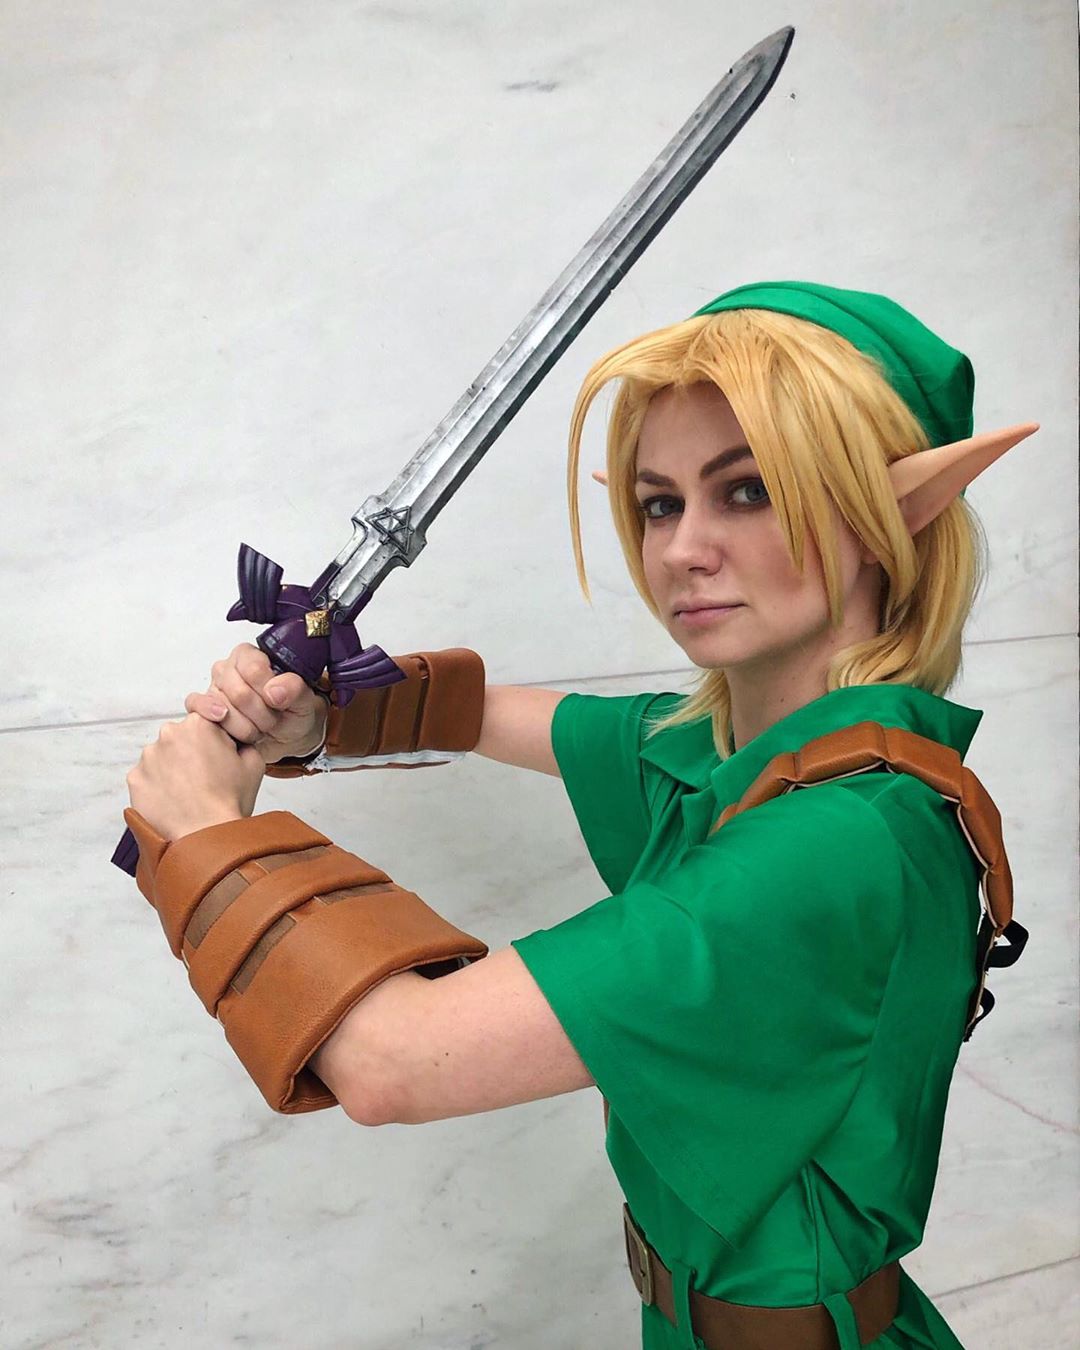 The Legend of Zelda: Ocarina of Time Group Cosplay